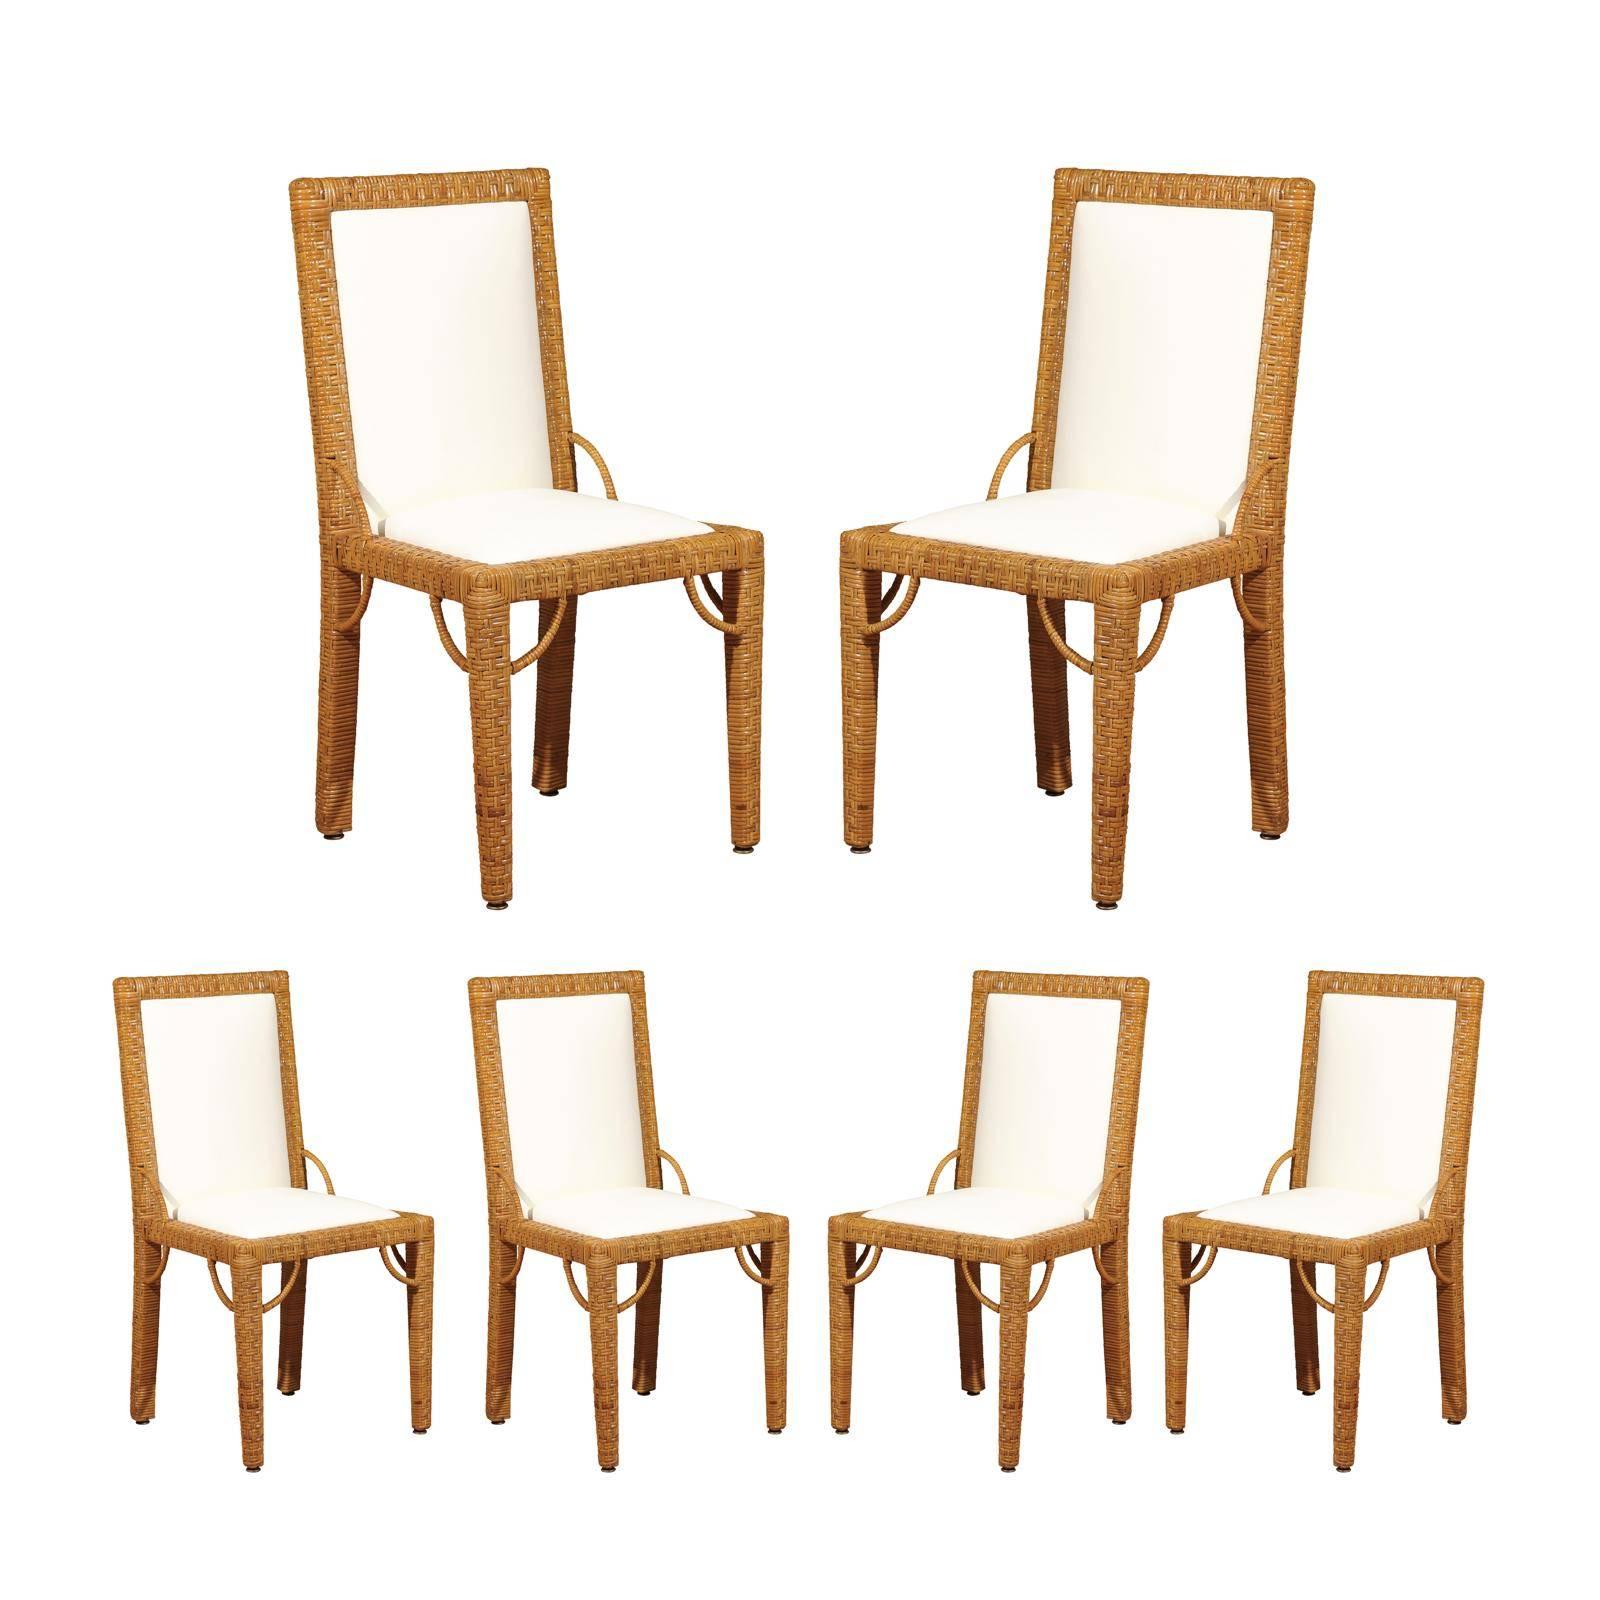 Stylish Set of 6 Restored Rattan Parsons Style Dining Chairs, circa 1975